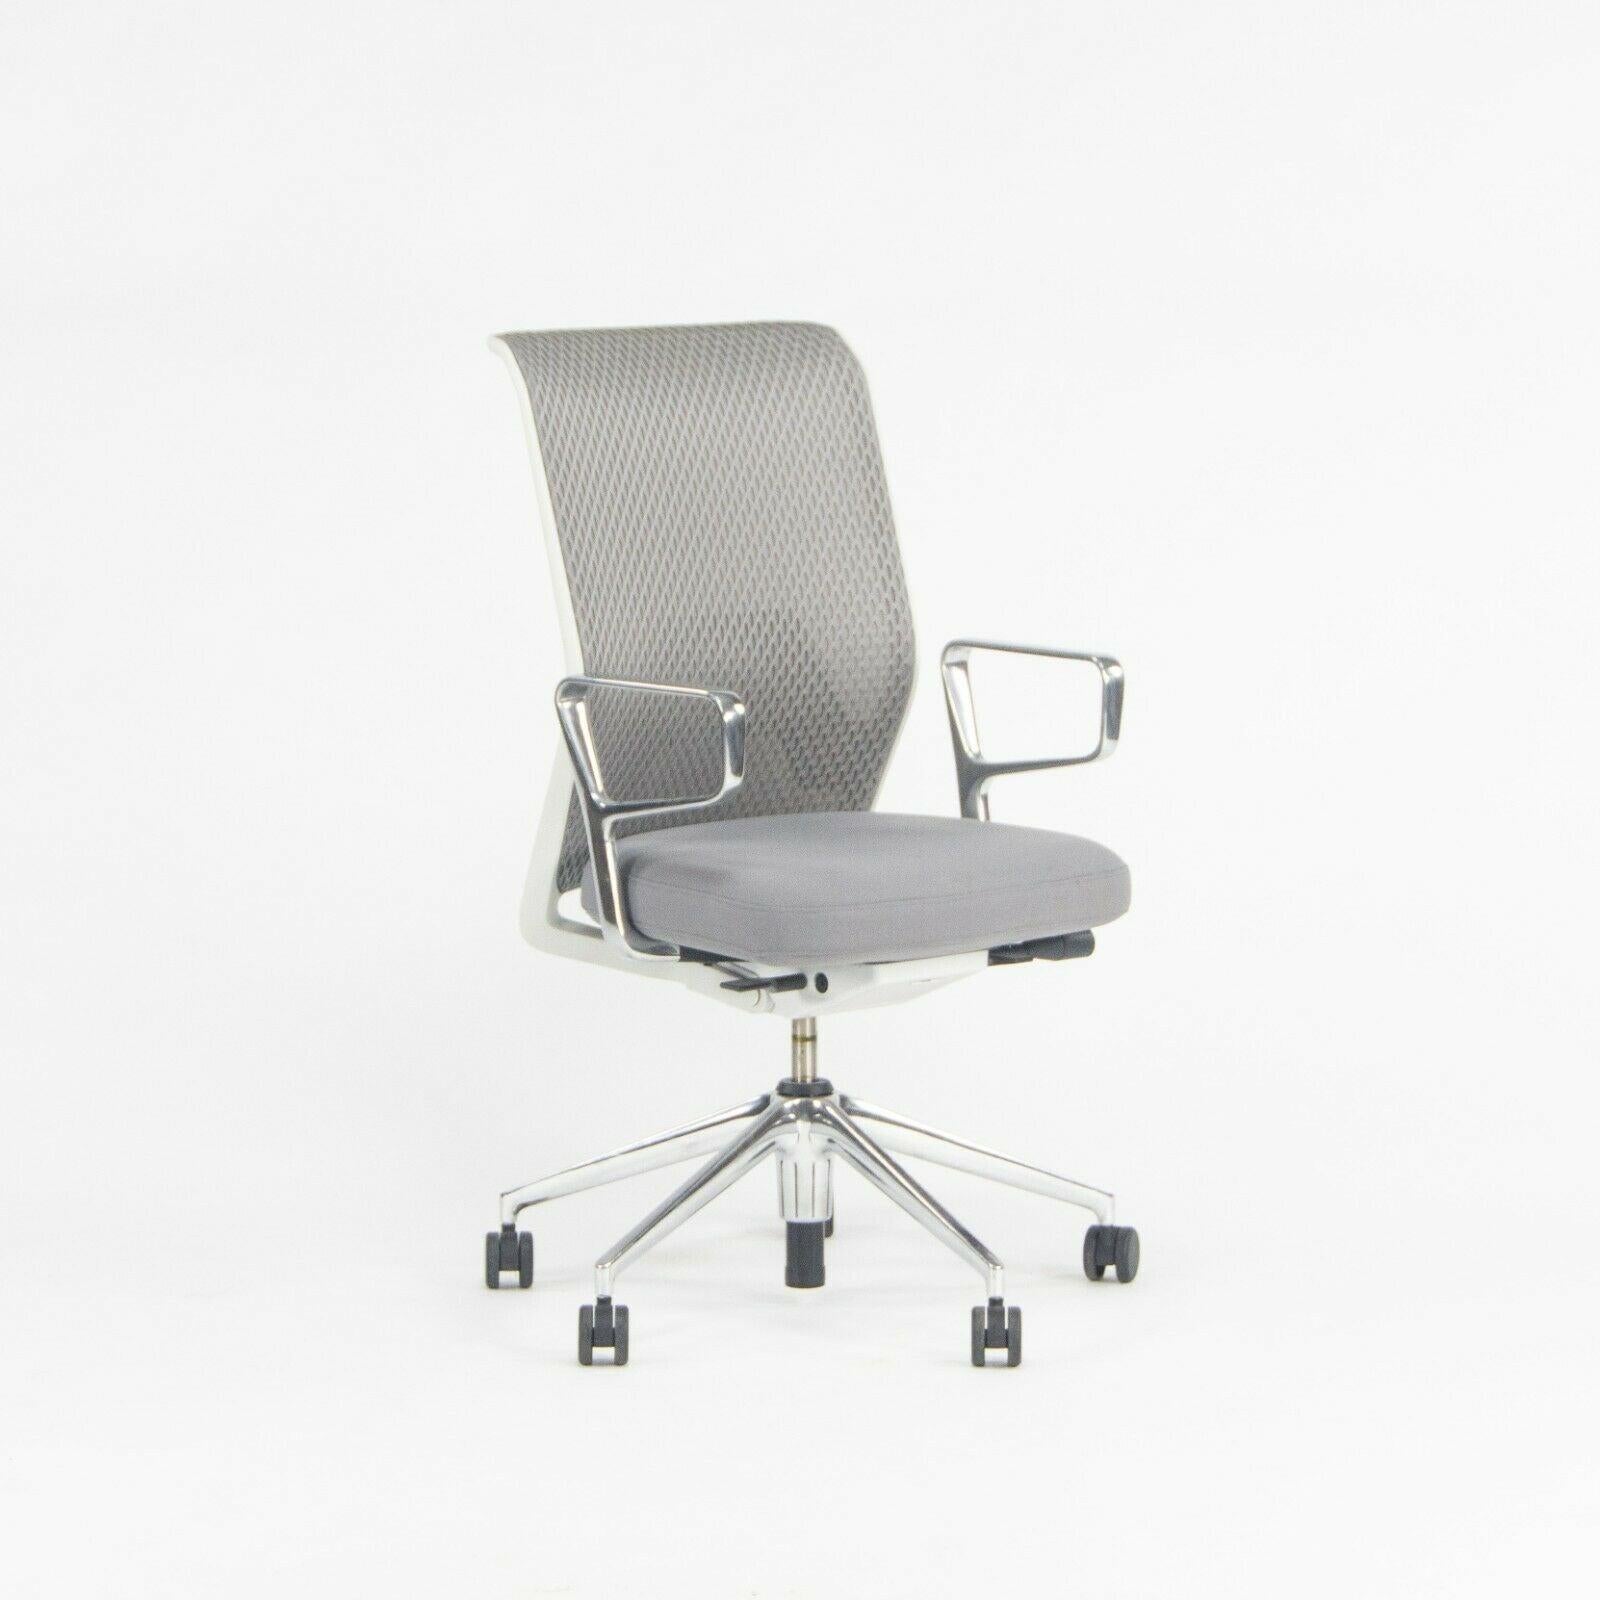 Modern 2015 Gray Vitra ID Mesh Desk Chairs by Antonio Citterio Polished Arms / Bases For Sale